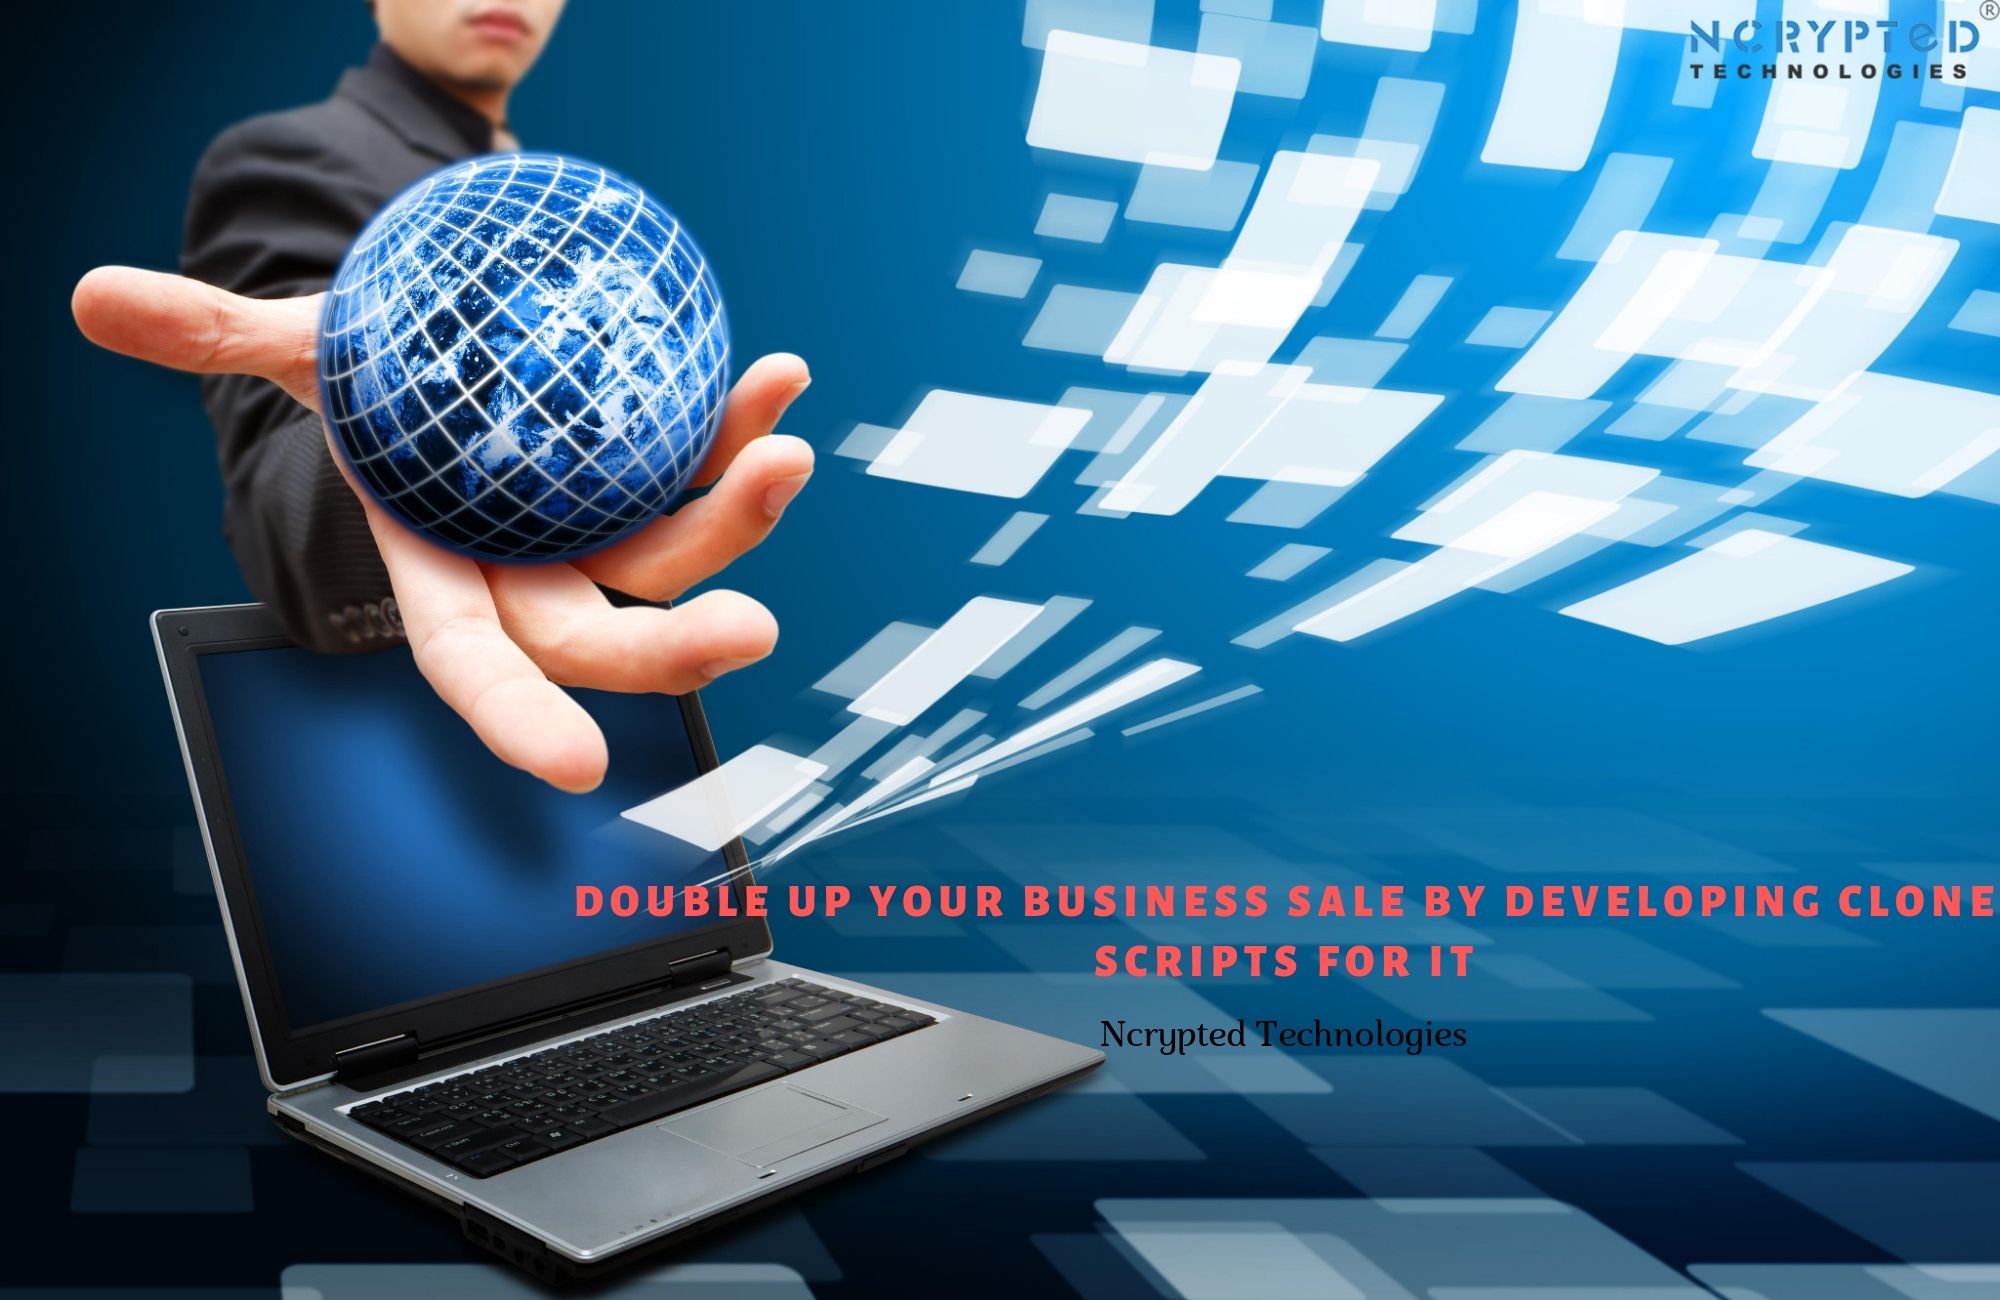 Double Up Your Business Sale by Developing Clone Scripts for It